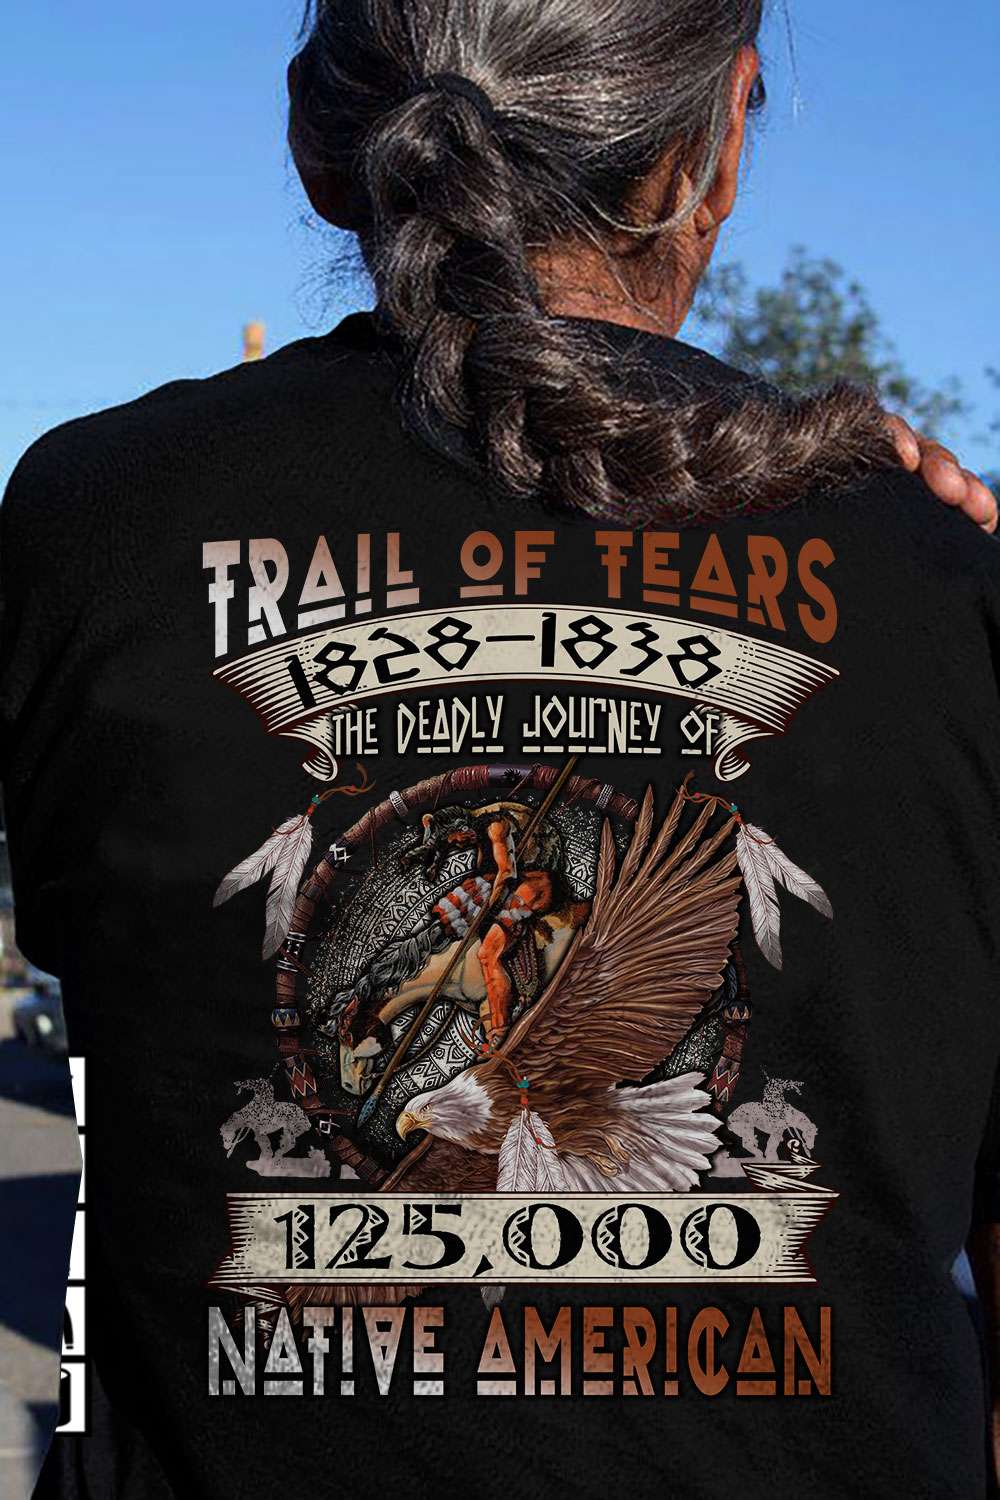 Trail of tears 1828 - 1838 The deadly jouney of 125000 Native America - Eagle native american